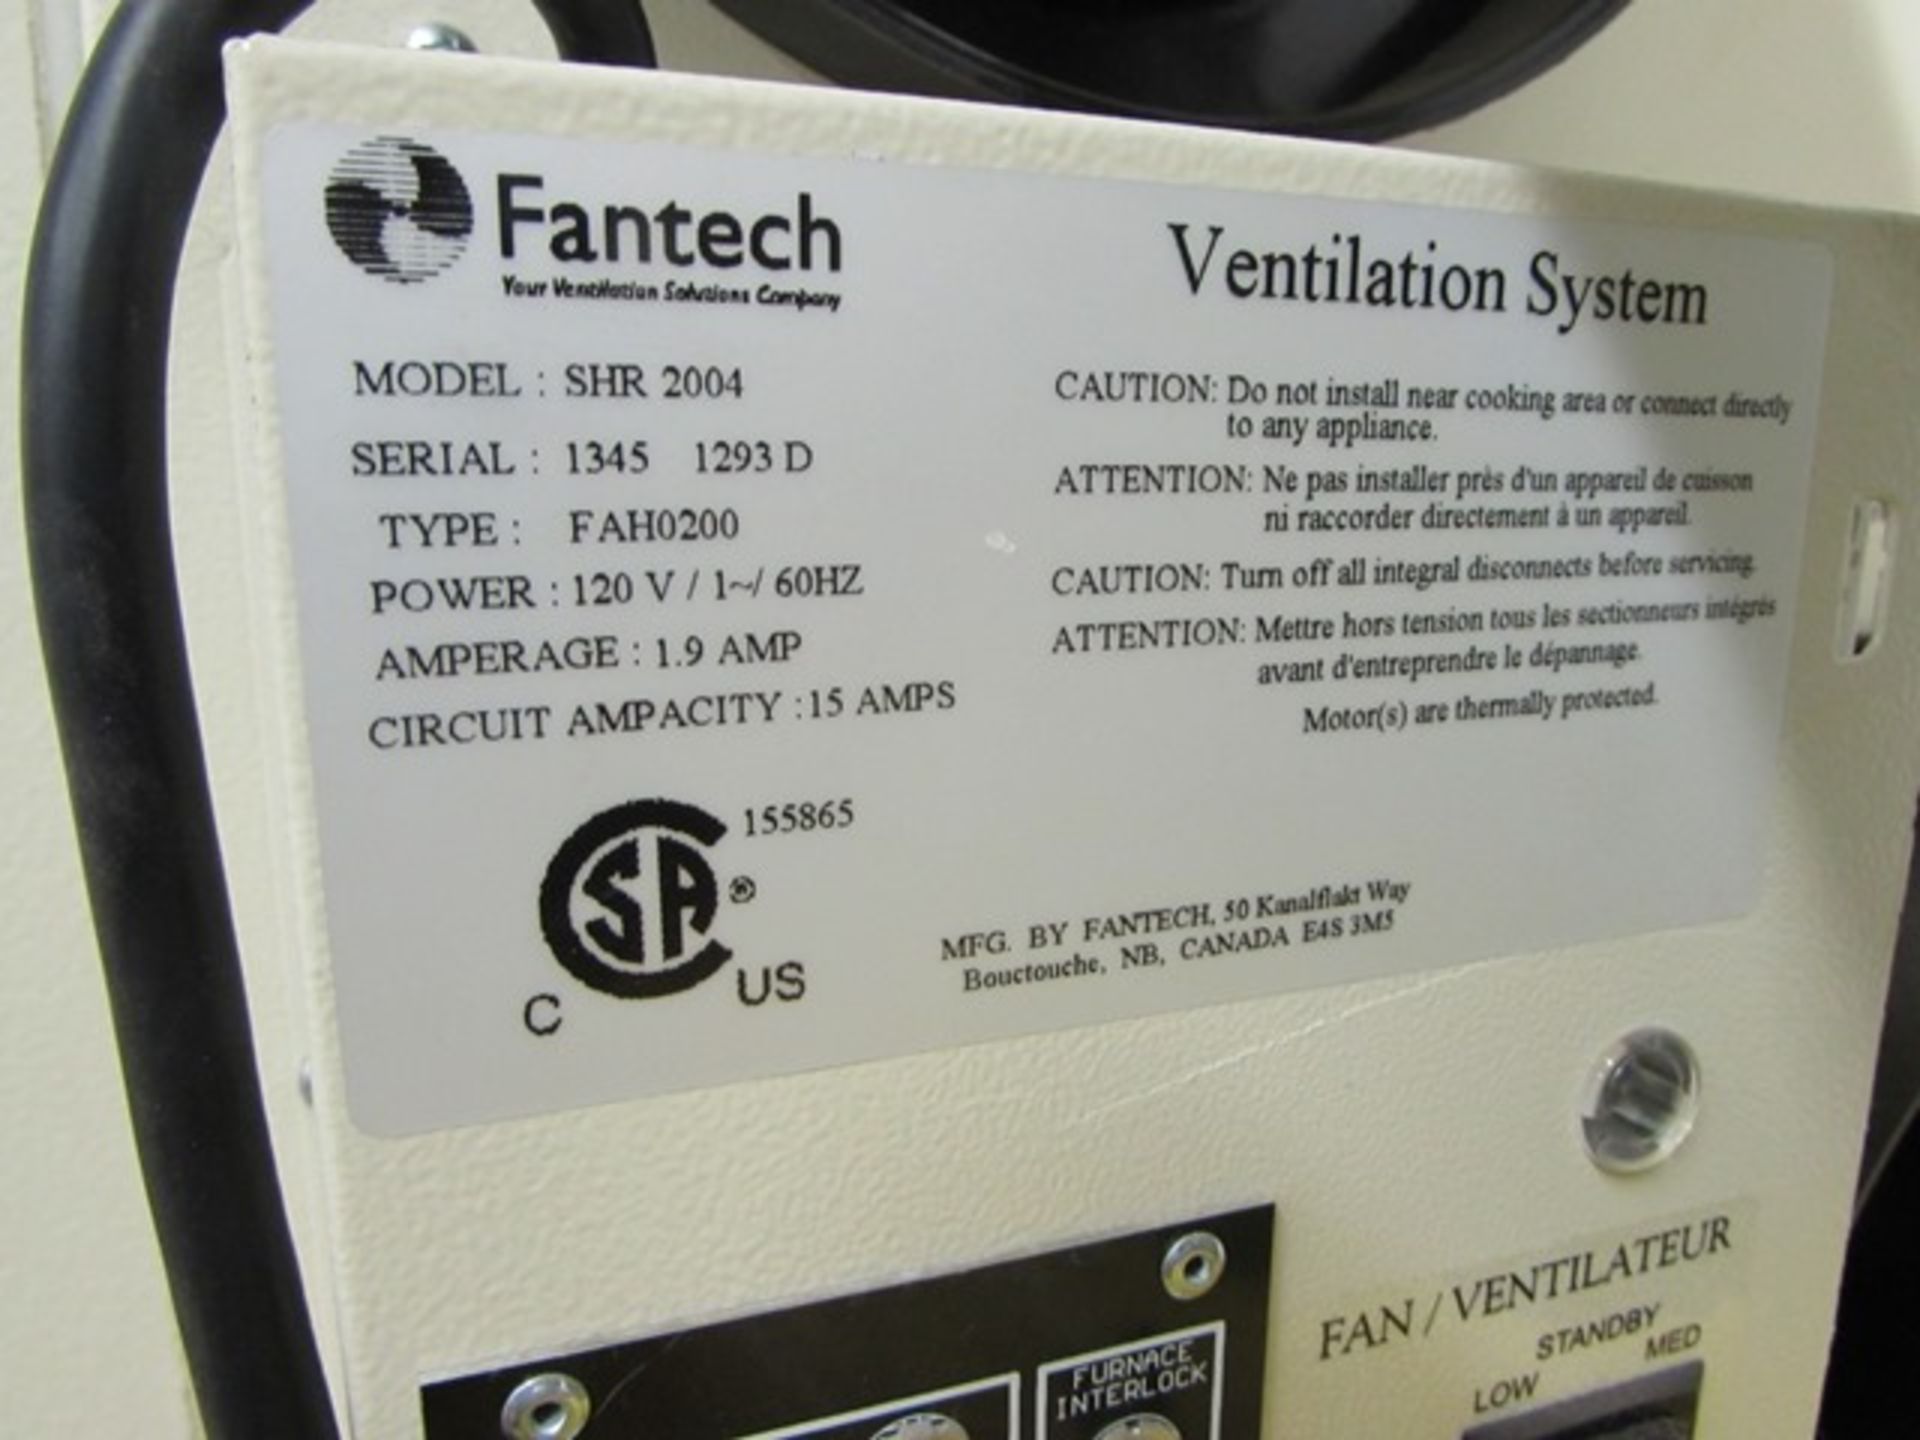 Fantech "SHR-2004" ventilation system c/w 2-sections ducting S/N - 1345 1293D - Image 3 of 3